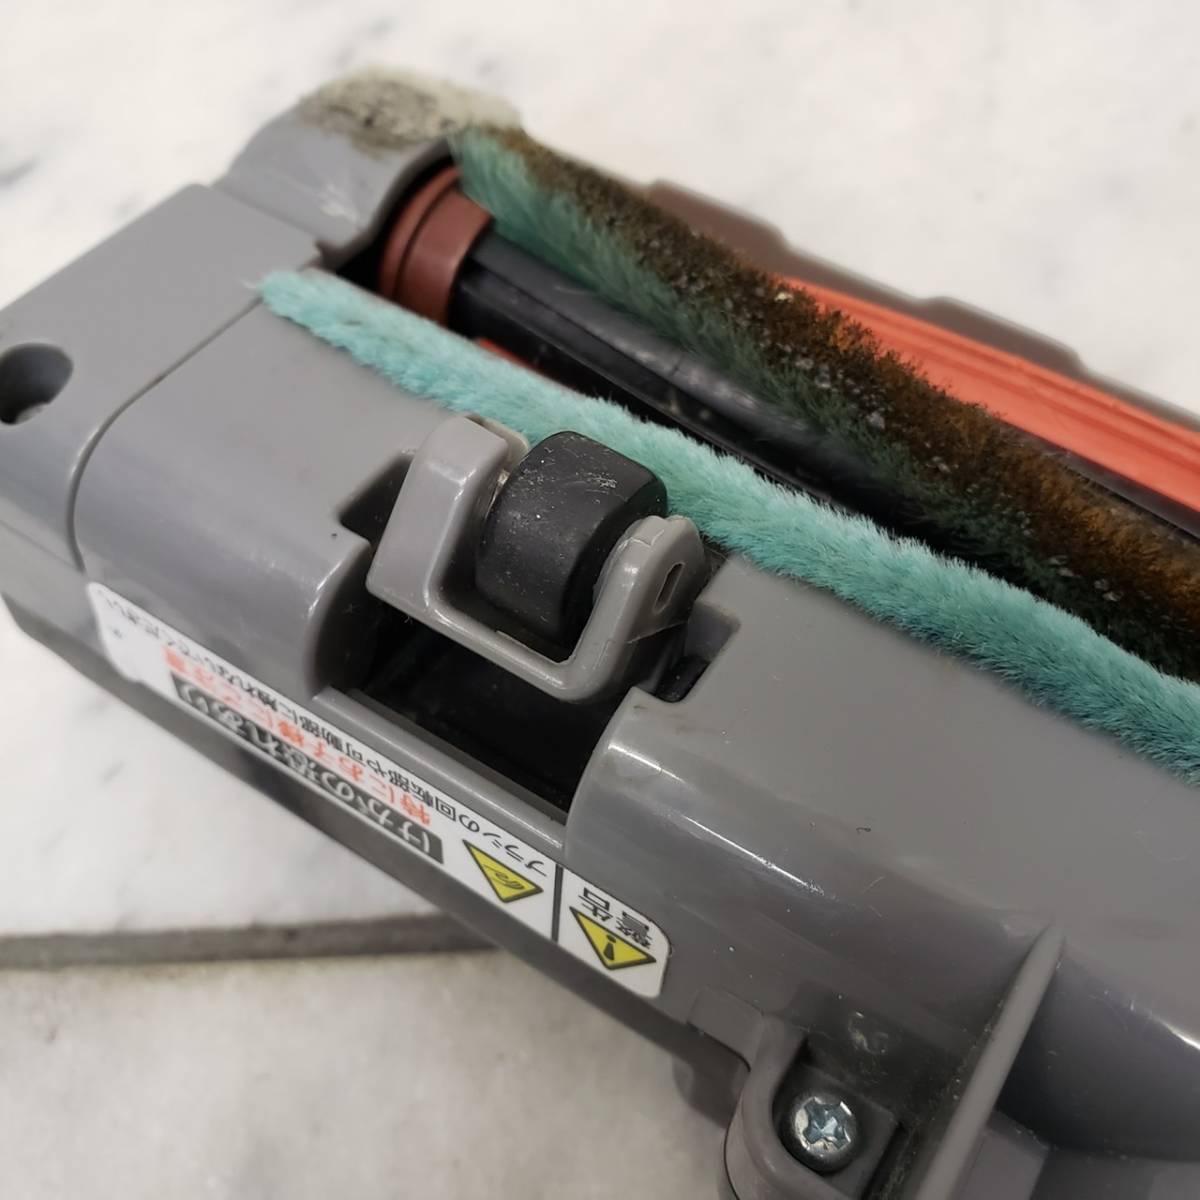  postage 800 jpy ~ operation verification ending disassembly cleaning being completed SHARP sharp floor movement shape electric vacuum cleaner EC-PX700 CYCLONE POWER HEAD Cyclone power head 231112